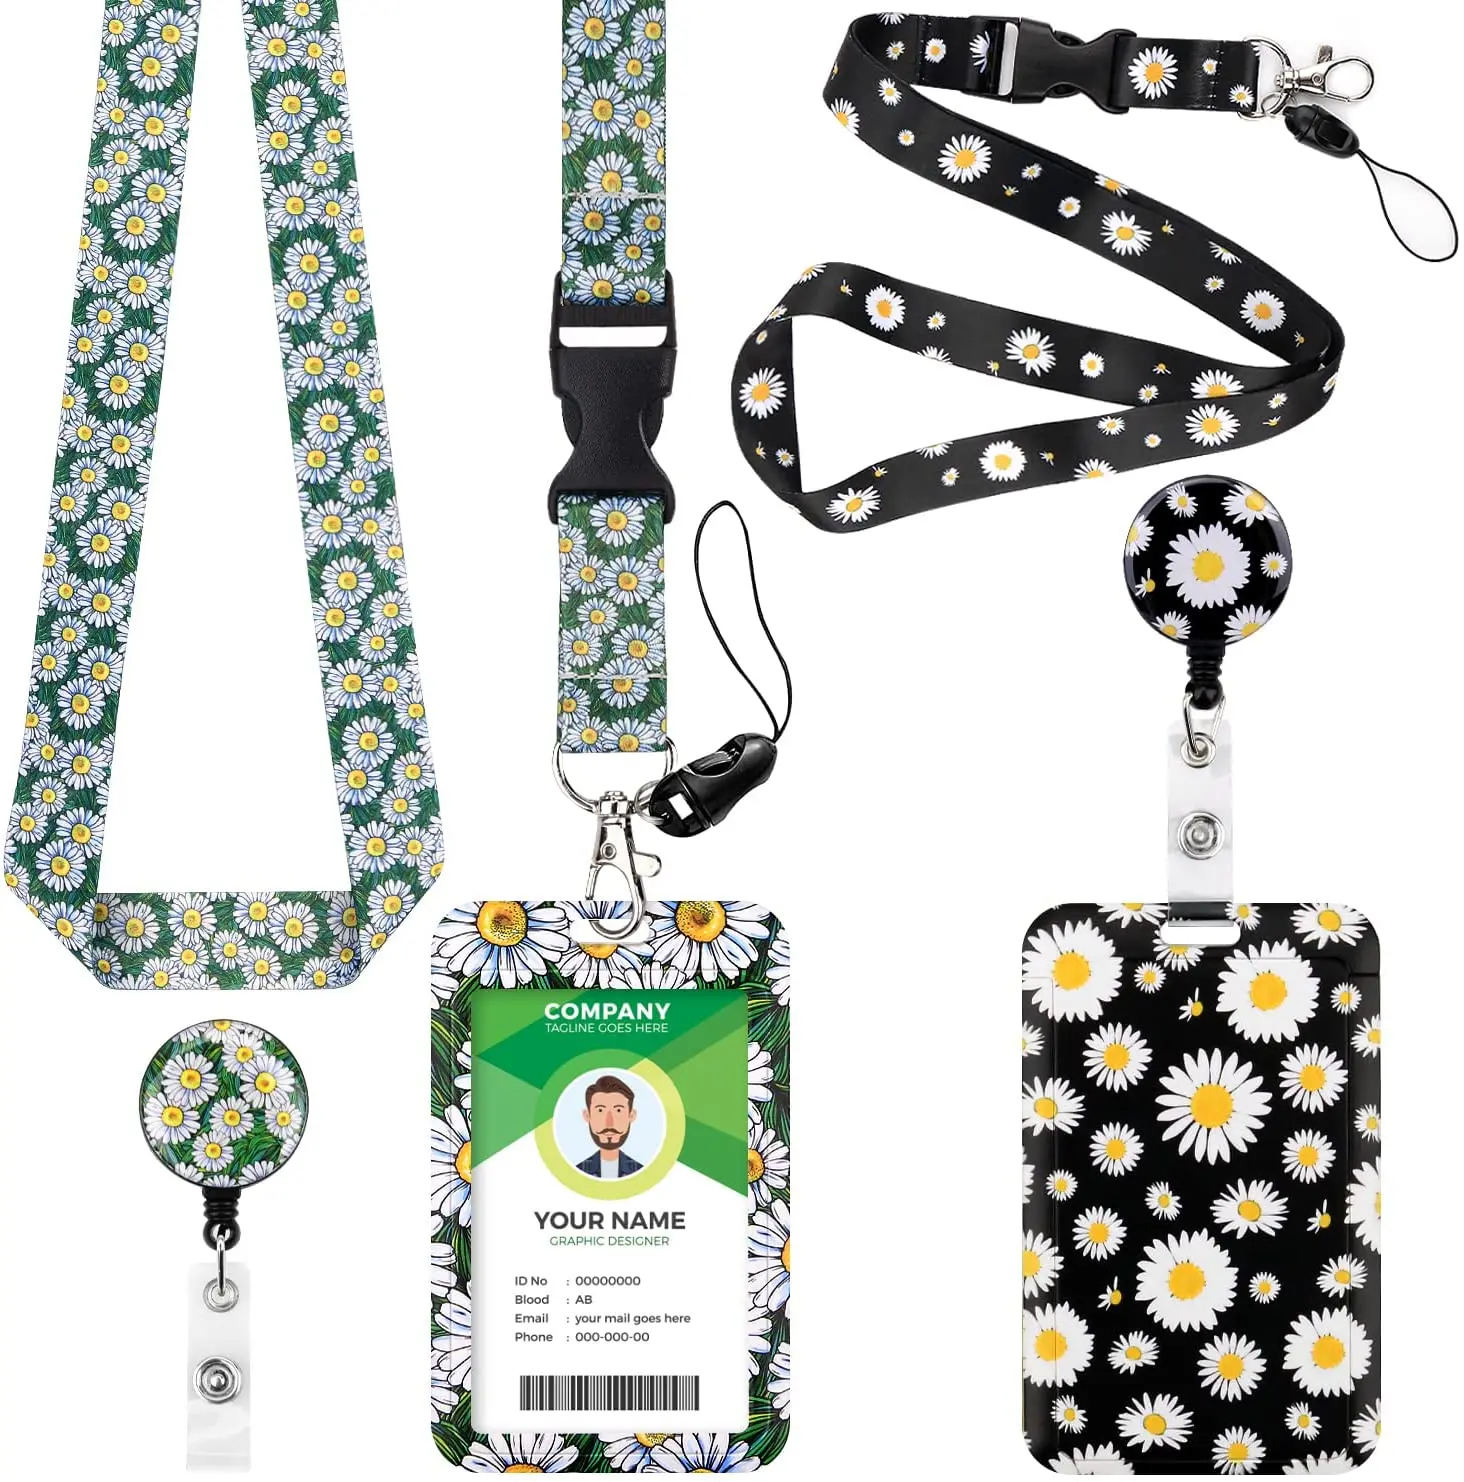 Retractable ID Badge Holder with Lanyard -2 Pack Fashionable ID Card Holders Sleeves with Detachable Neck Strap for Keys,